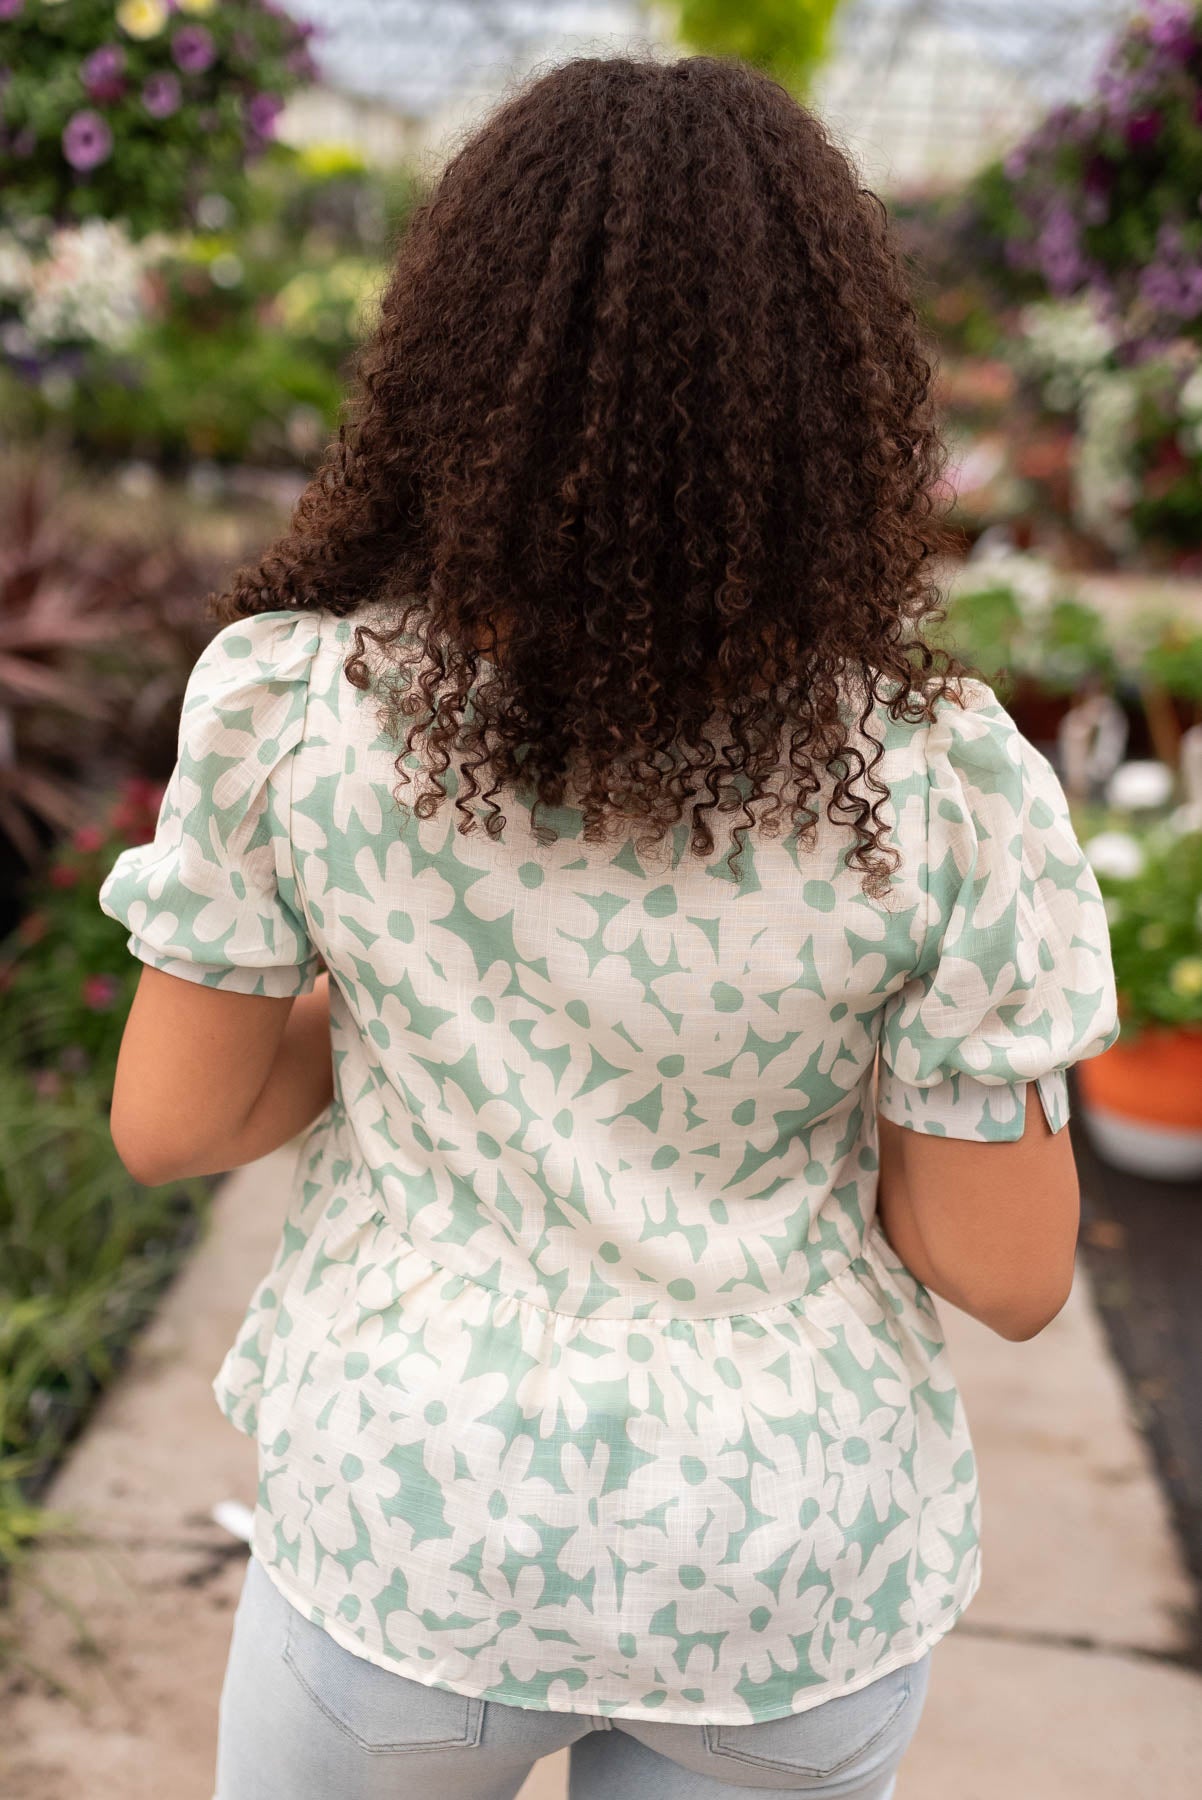 Back view of the green floral blouse